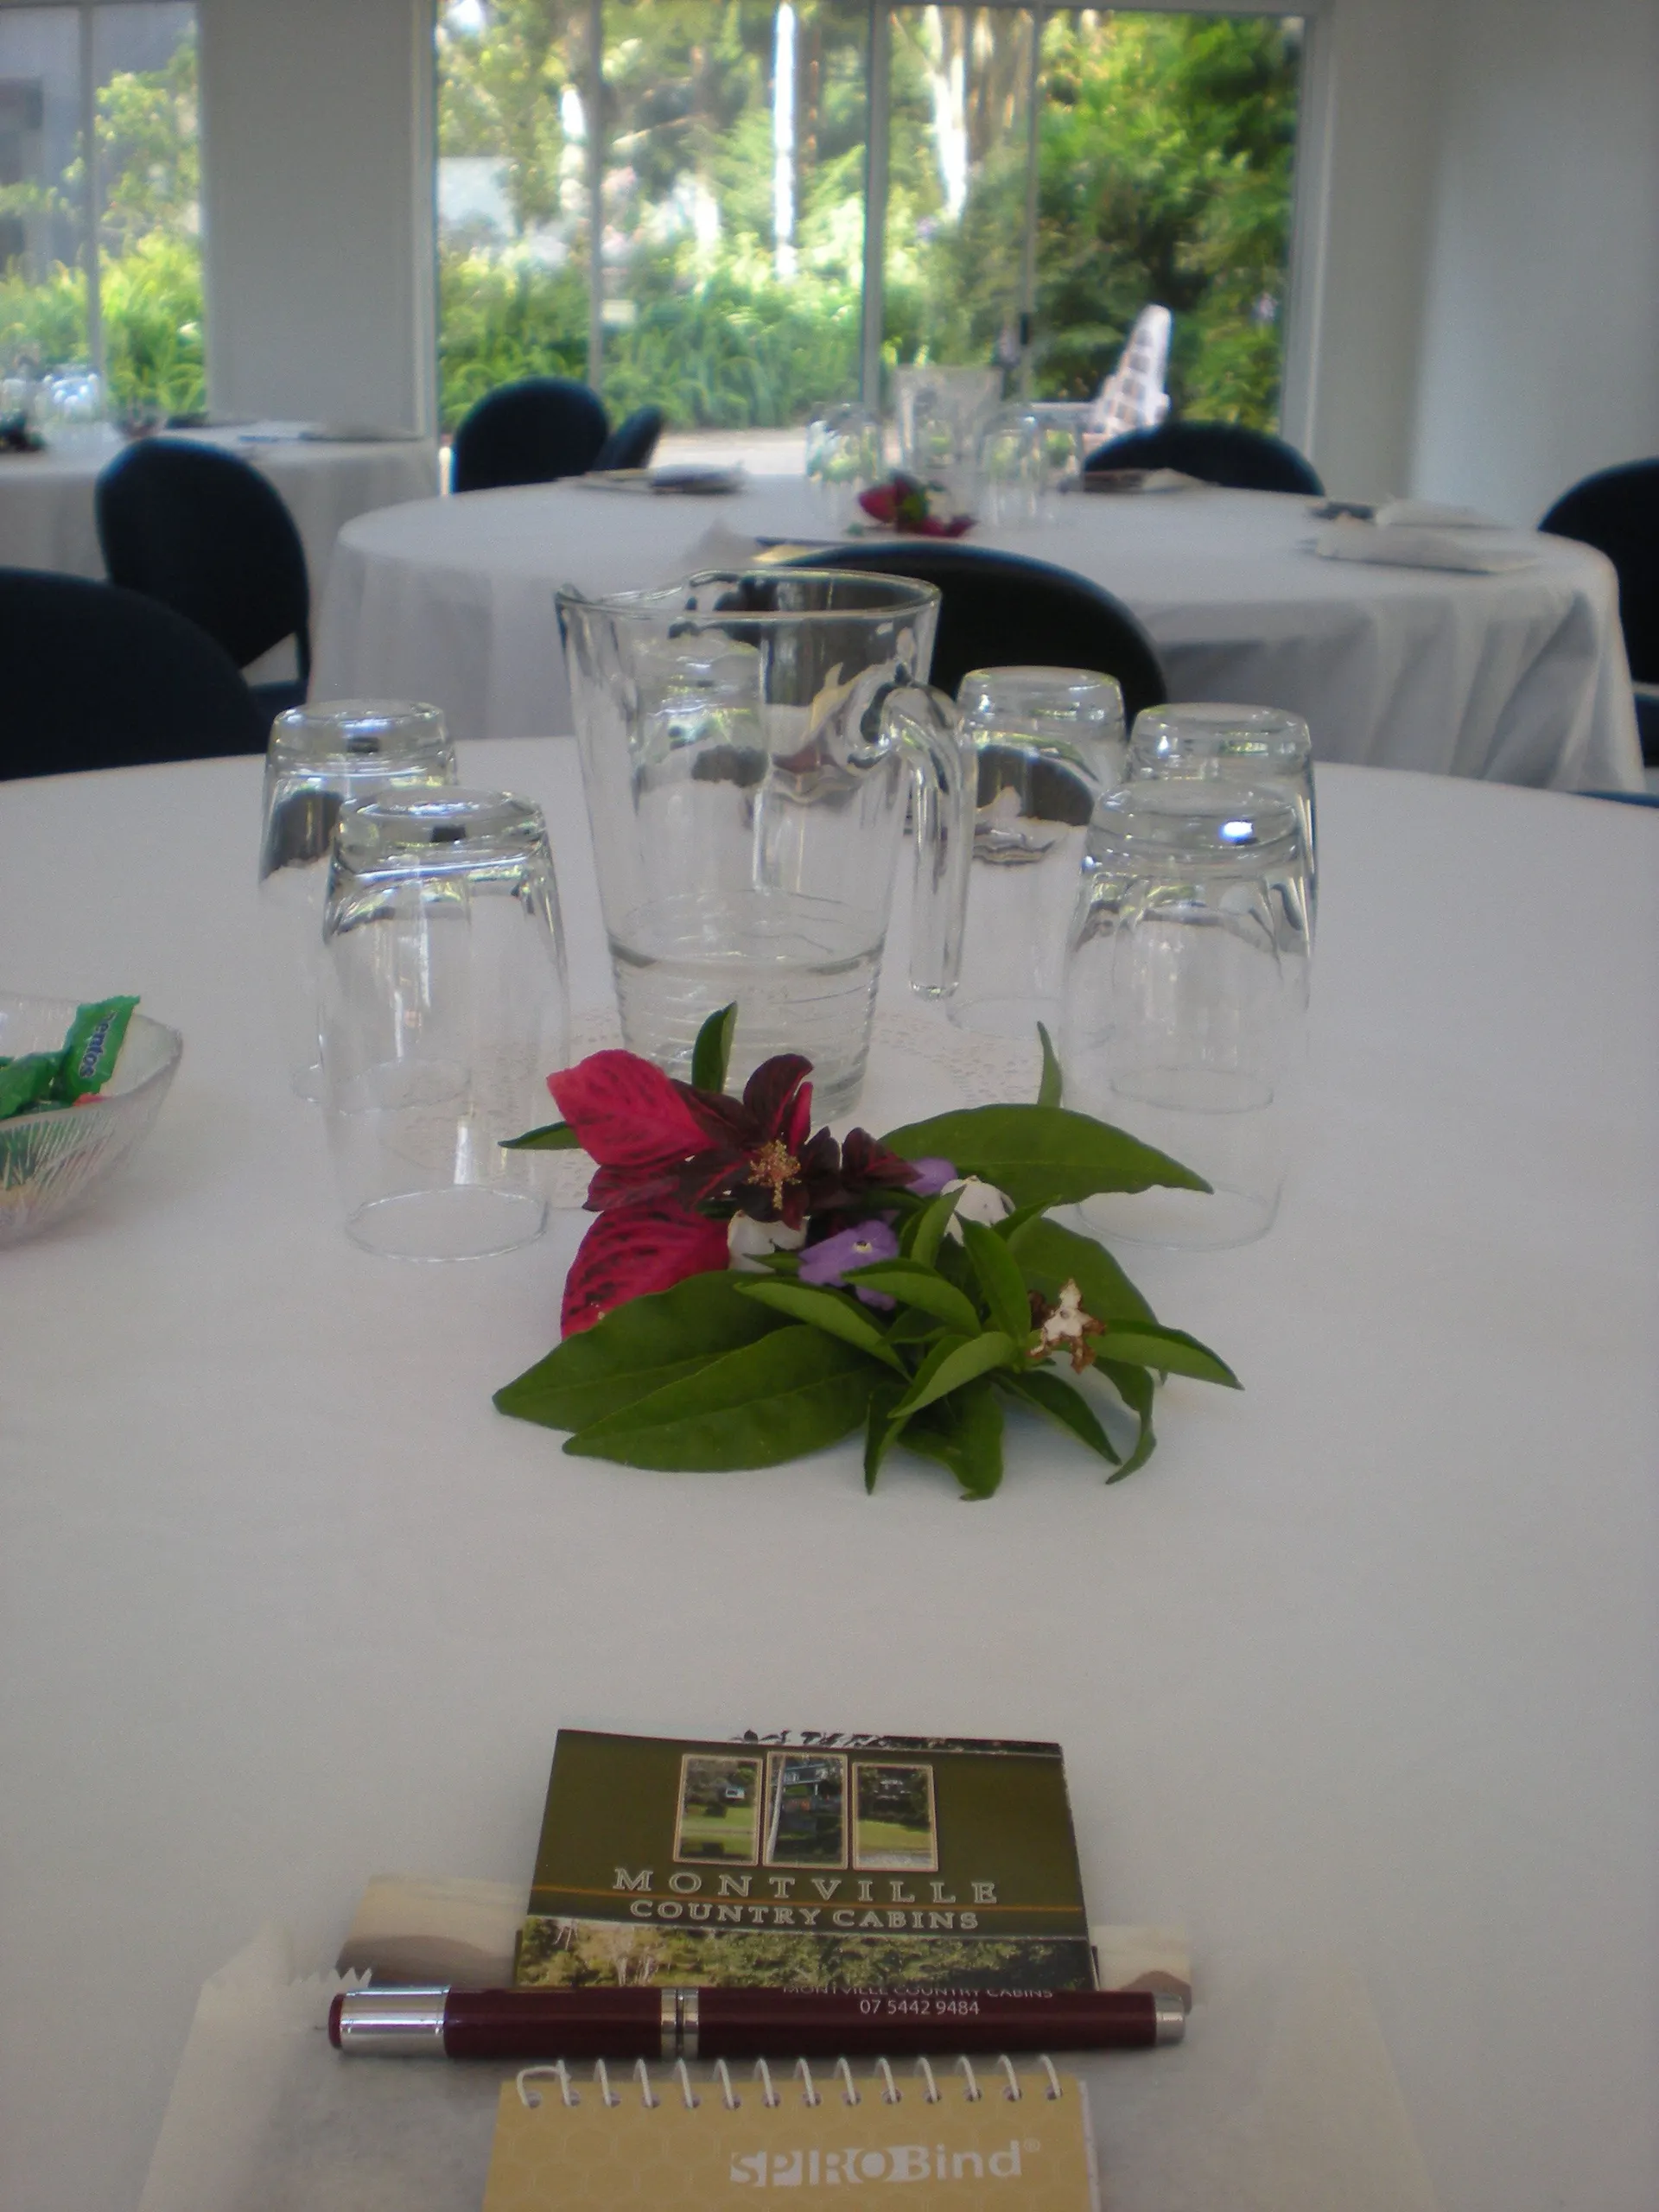 Facilities for meetings with all necessary equipment and accommodation on site